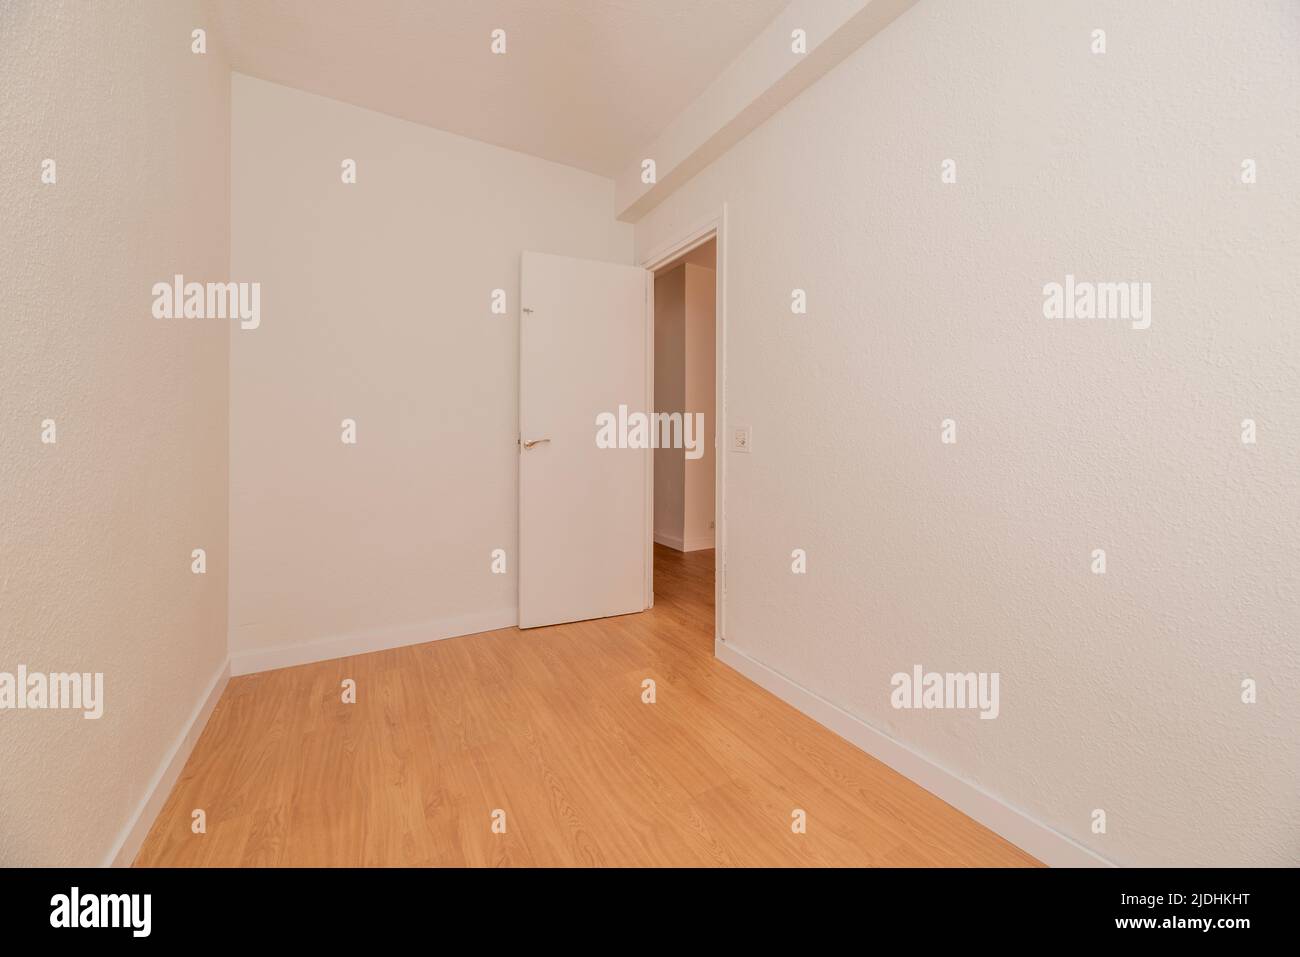 Small empty room with light wood flooring, white woodwork and white wood door Stock Photo